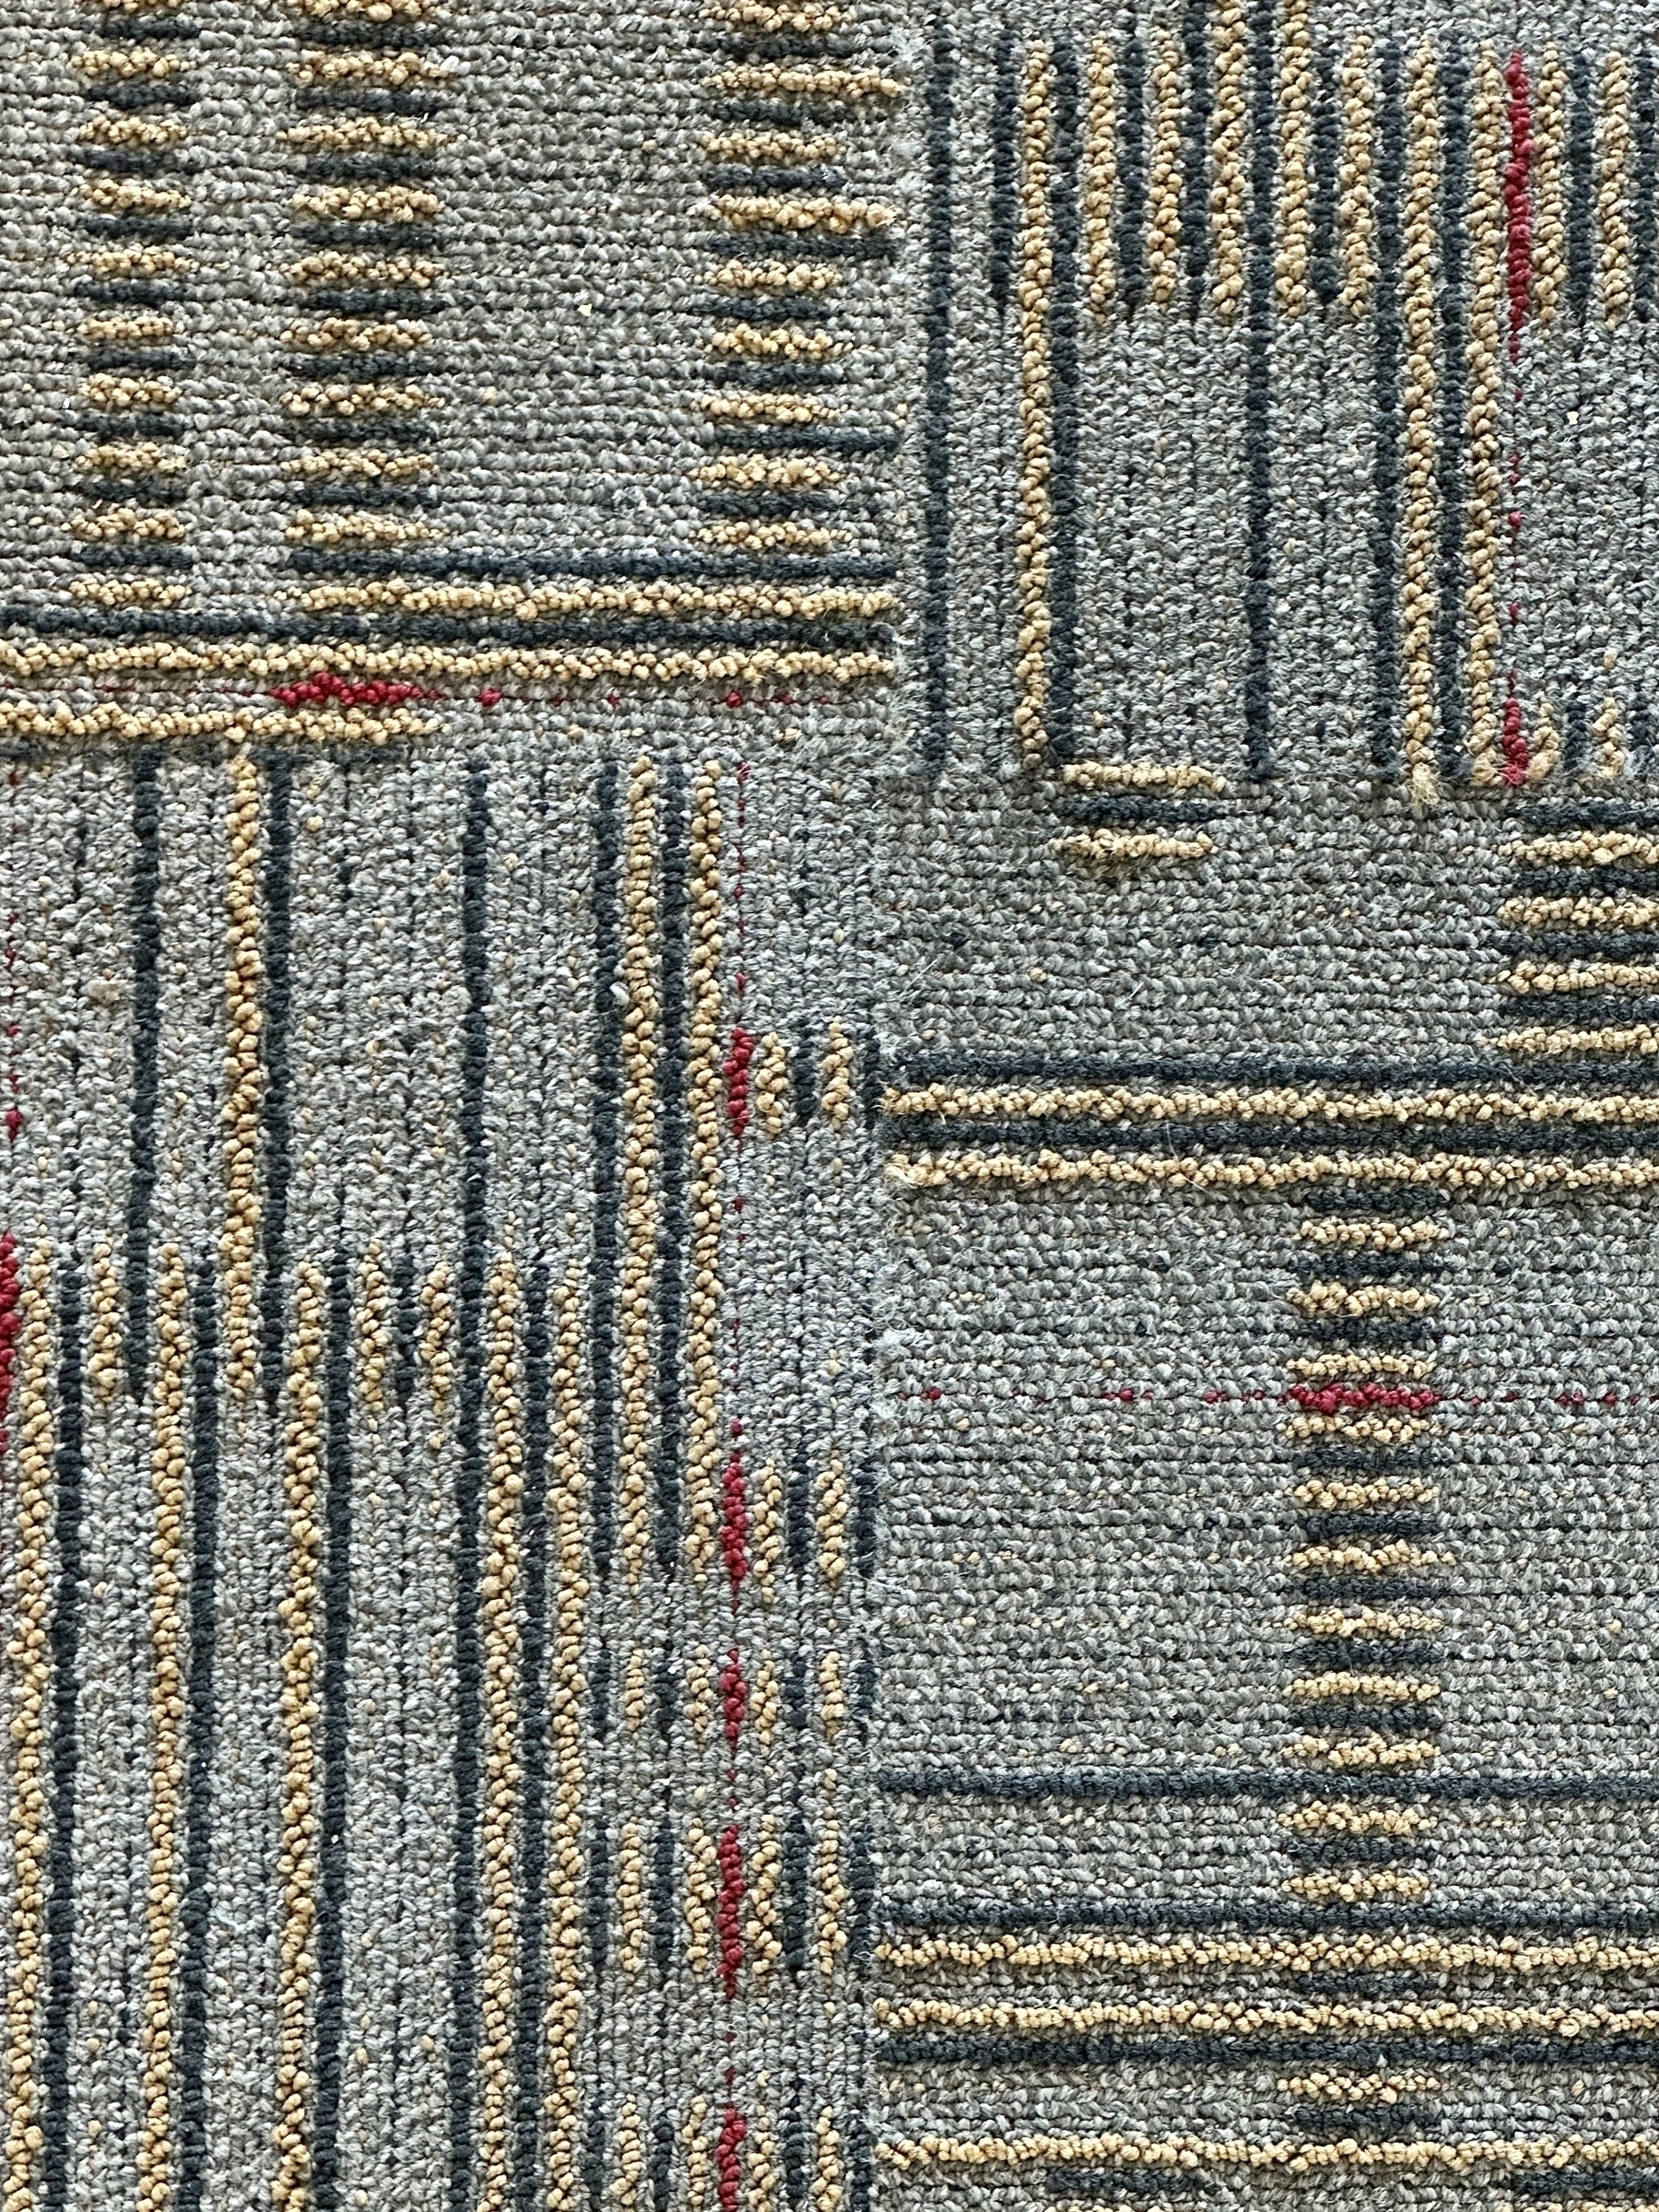 Photo of a dull-gray carpet with an abstract linear pattern.